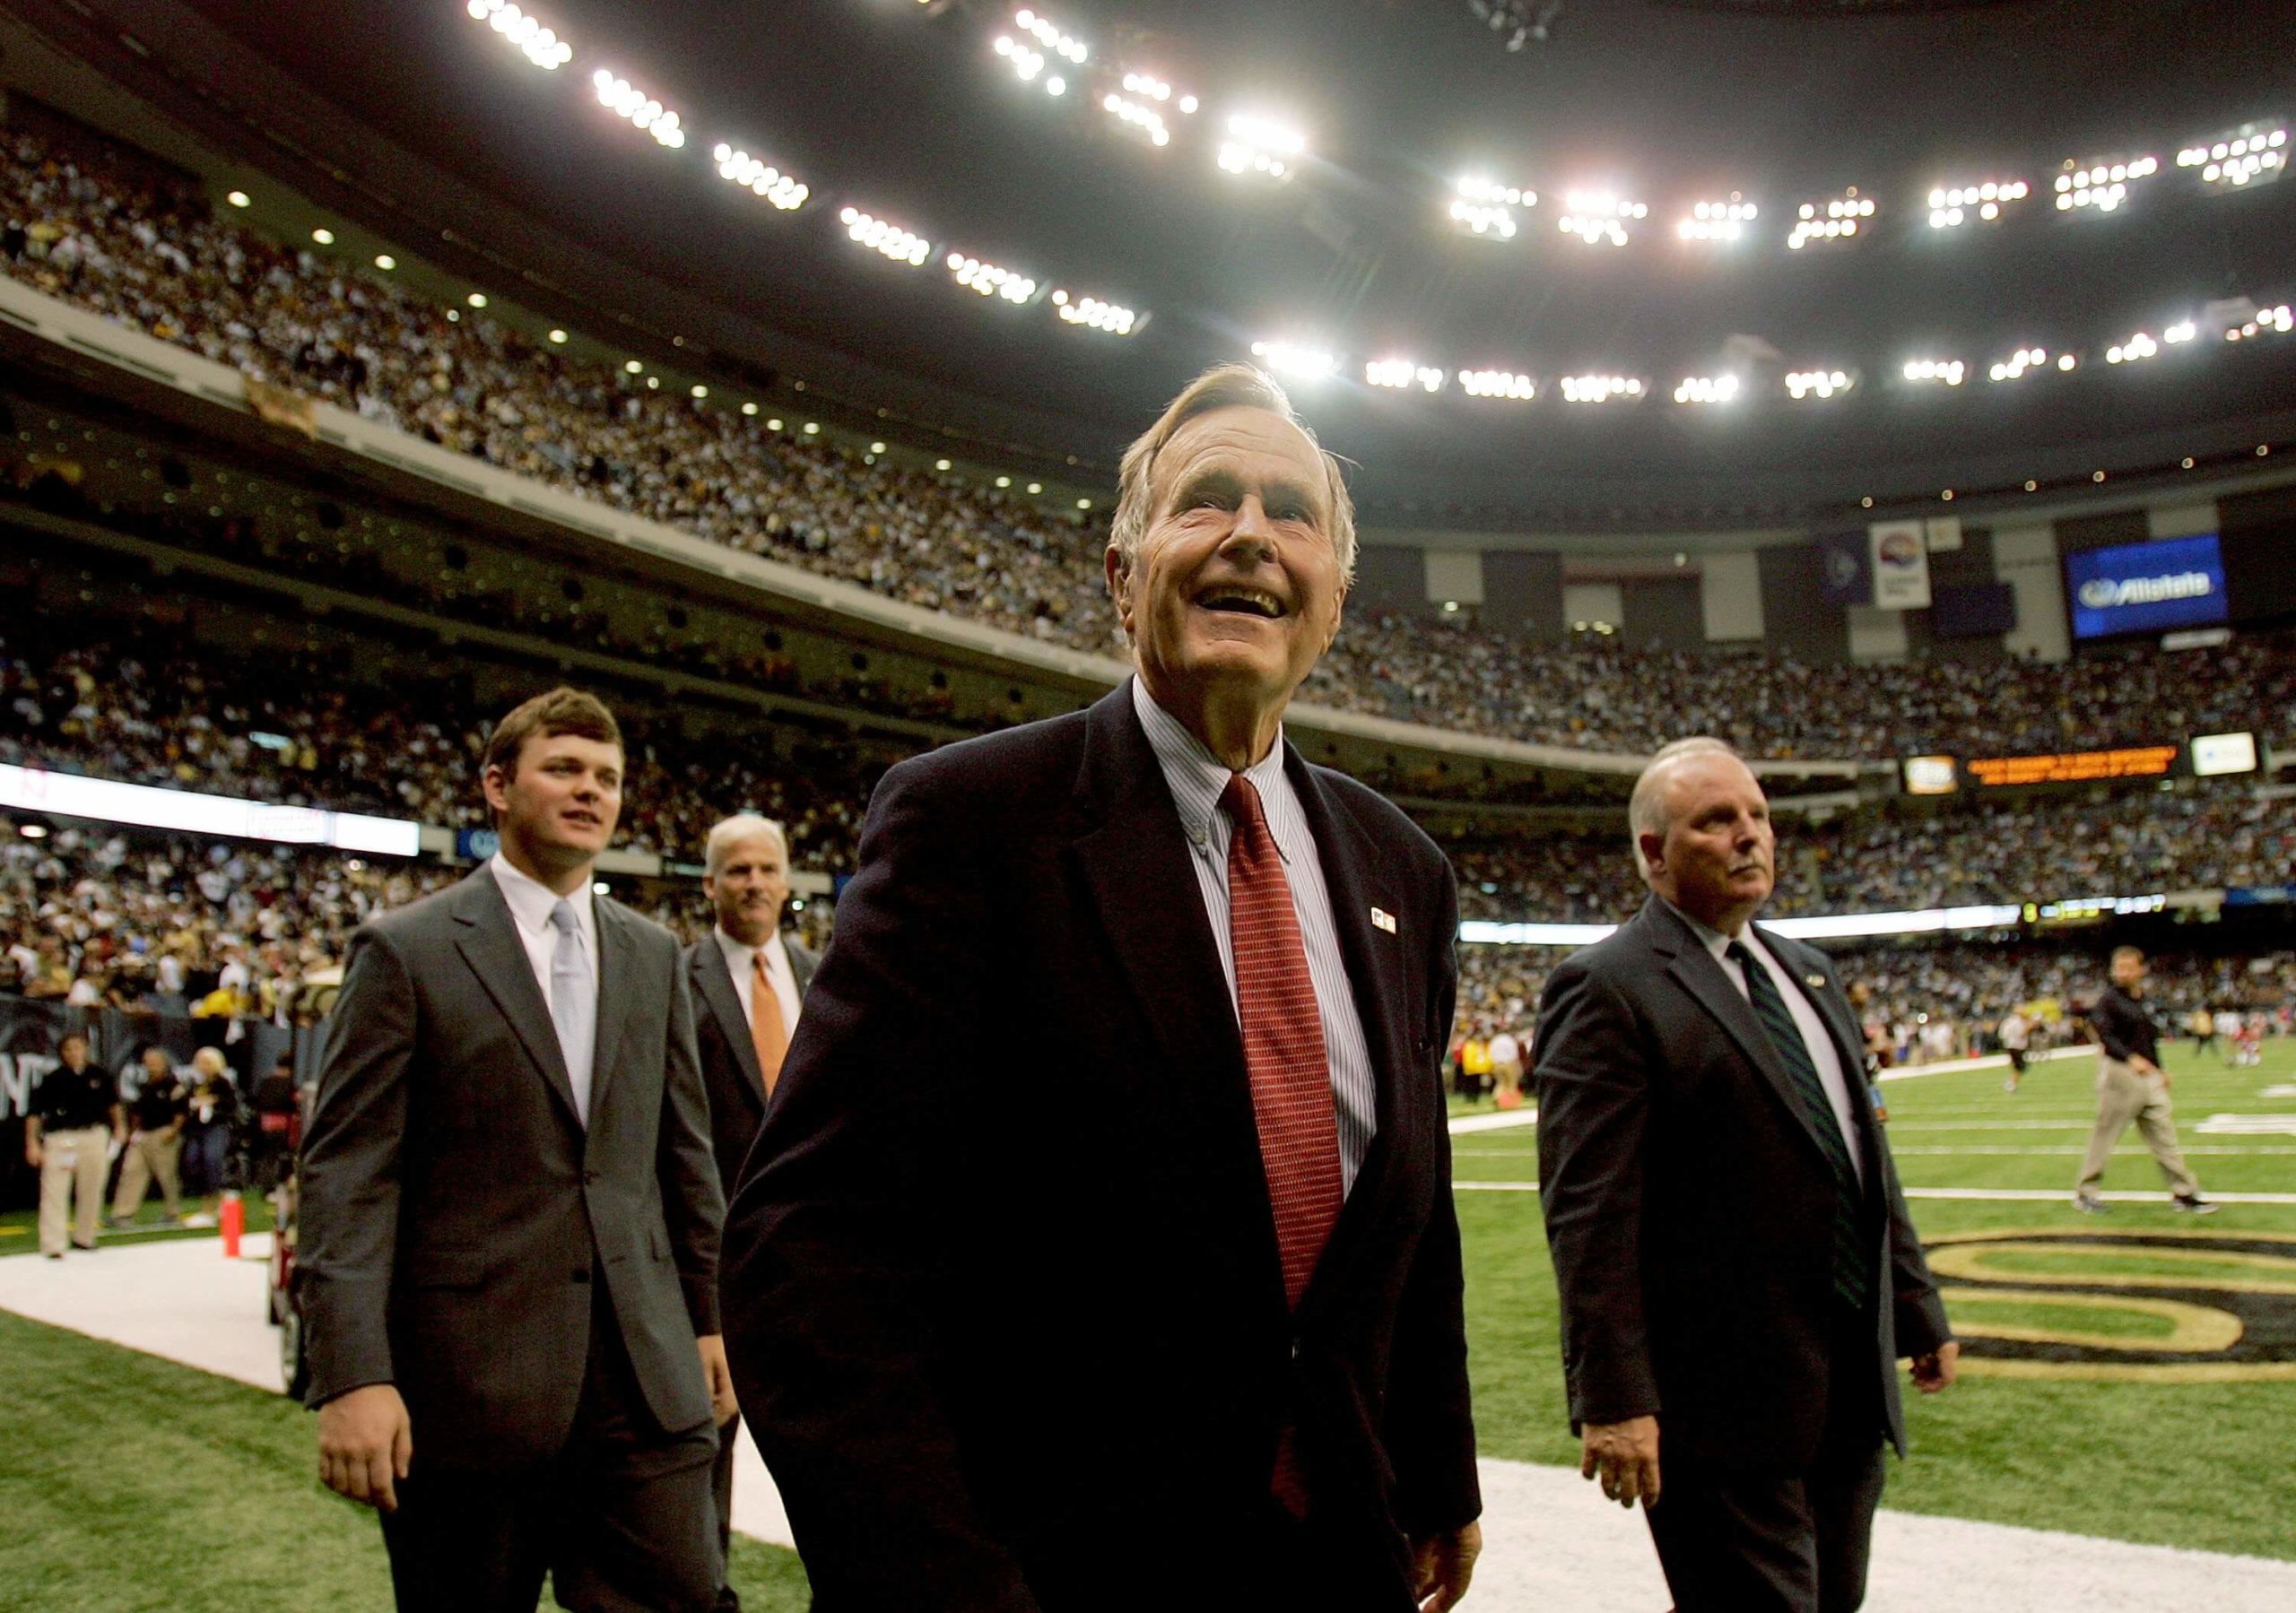 NEW ORLEANS - SEPTEMBER 25:  Former President of the United States, George H. W. Bush (C) walks on the field for the coin toss prior to the Monday Night Football game between the Atlanta Falcons and the New Orleans Saints on September 25, 2006 at the Superdome in New Orleans, Louisiana. Tonight's game marks the first time since Hurricane Katrina struck last August, that the Superdome, which served as a temporary shelter to thousands of stranded victims in the wake of Katrina, has played host to an NFL game.  (Photo by Ronald Martinez/Getty Images)